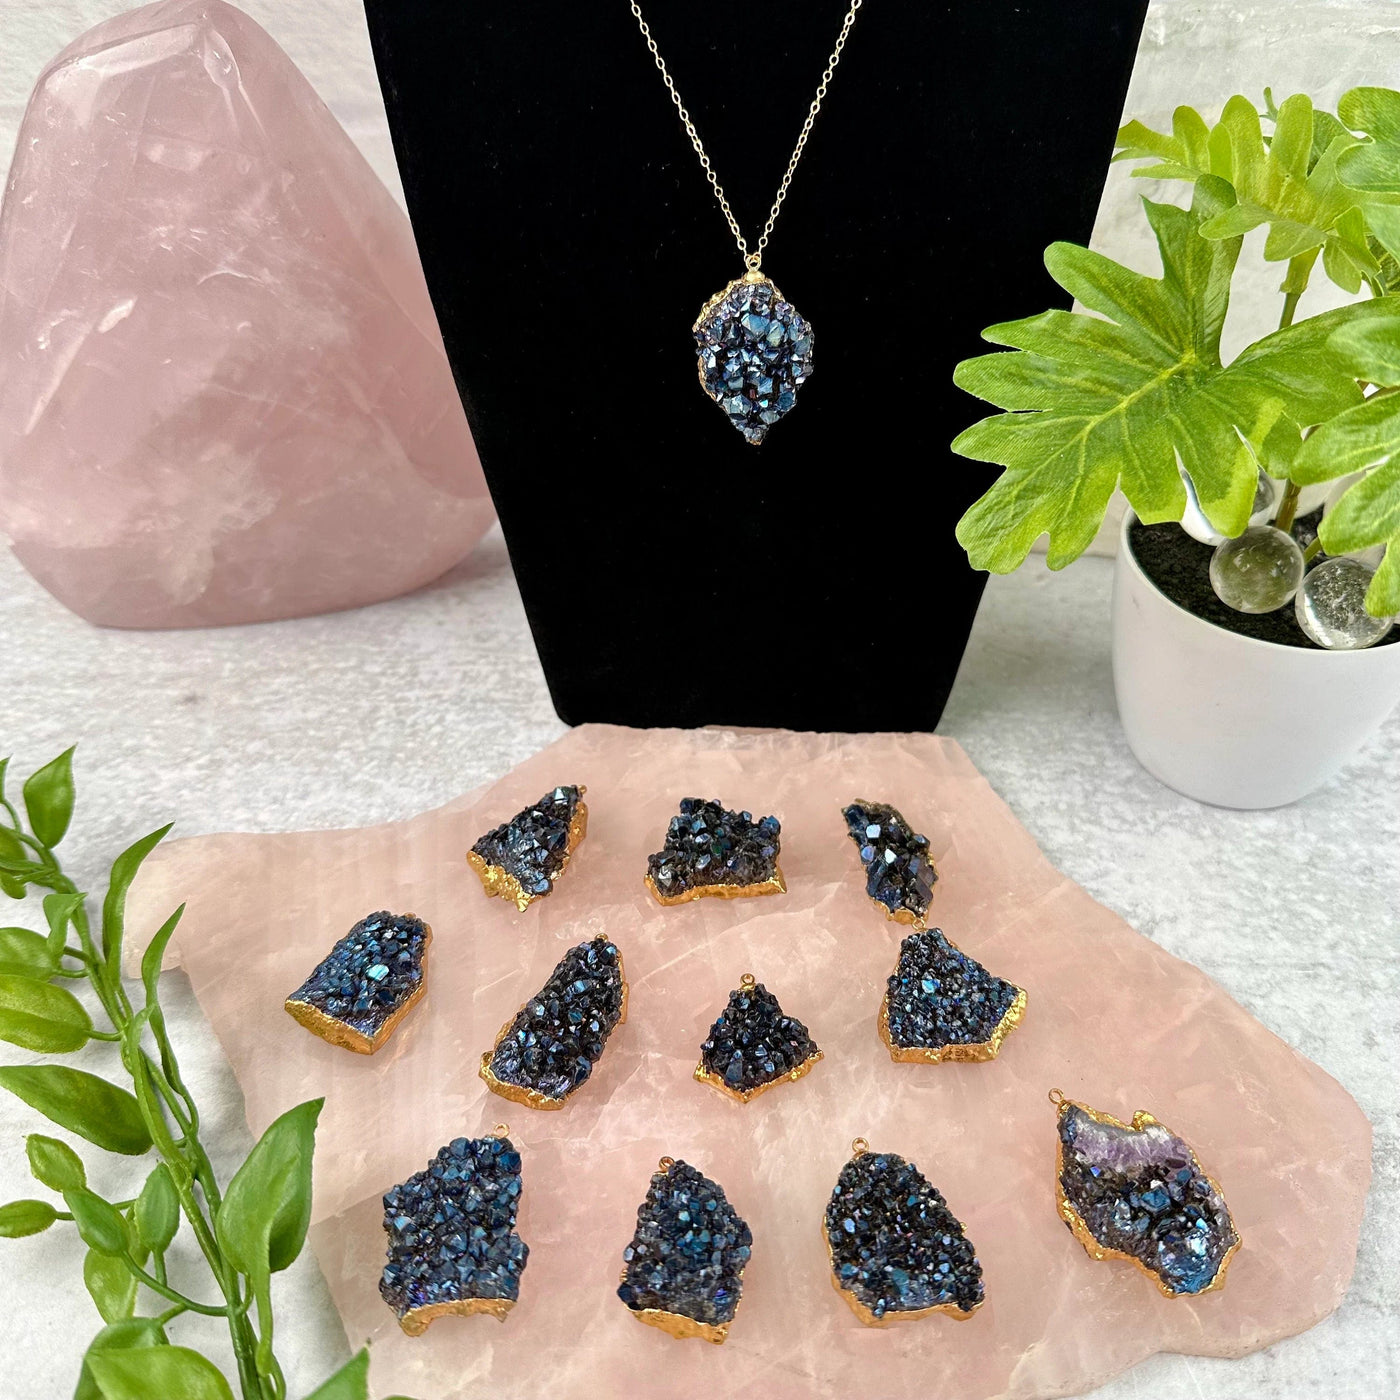 Mystic Blue Titanium Crystal Cluster Gold Plated Pendant - You Choose one pendant on necklace on stand  with other pendants on rose quartz platter